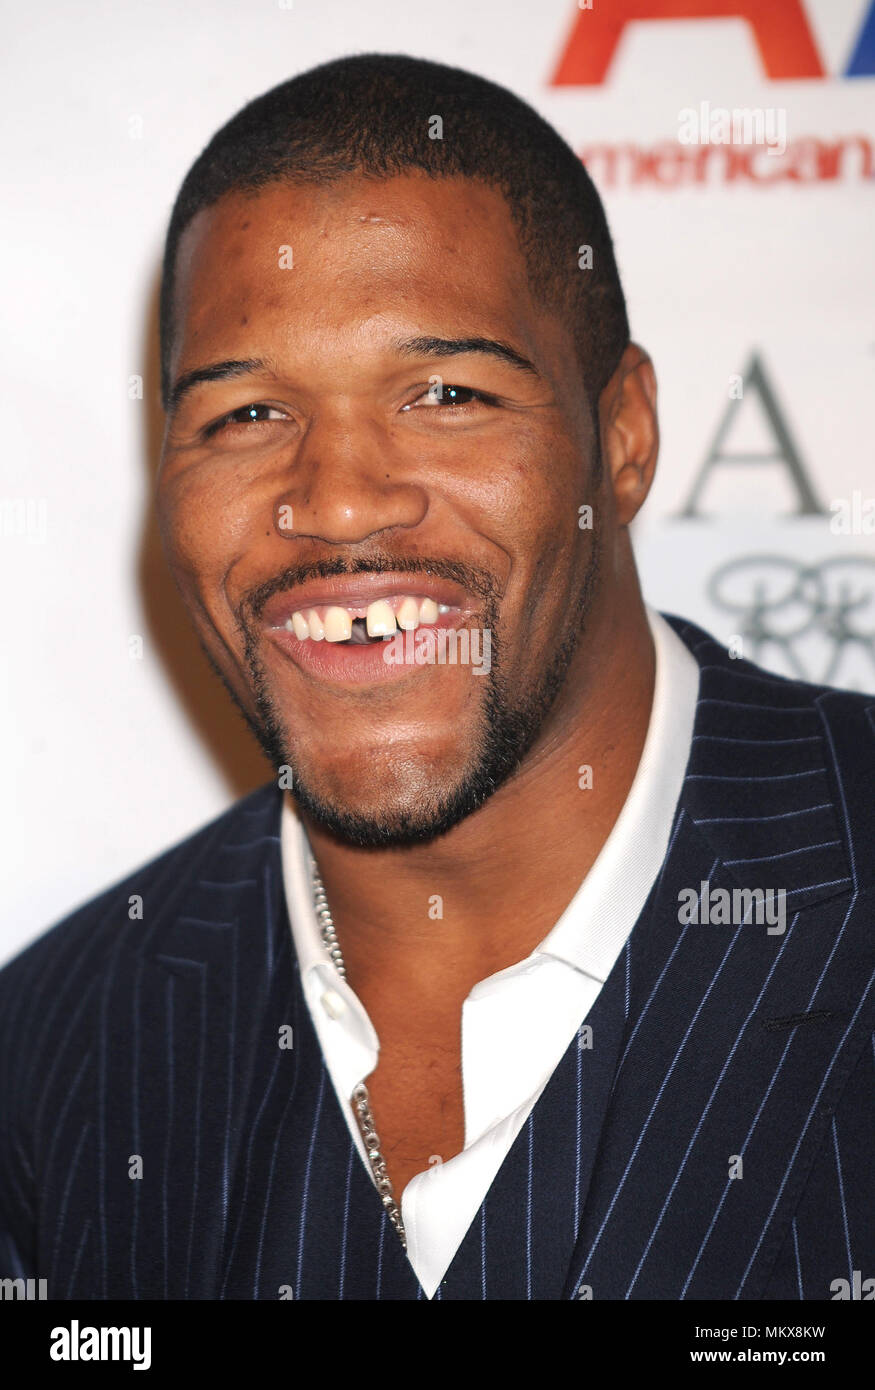 Michael Strahan at the 3rd Annual Saturday Night Spectacular hosted by Kevin Costner and Michael Strahan and presented by American Airlines and Texas Energy Holdings. T Pepin Hospitality Center in Tampa, Florida. January 31, 2009. Credit: Dennis Van Tine/MediaPunch Stock Photo